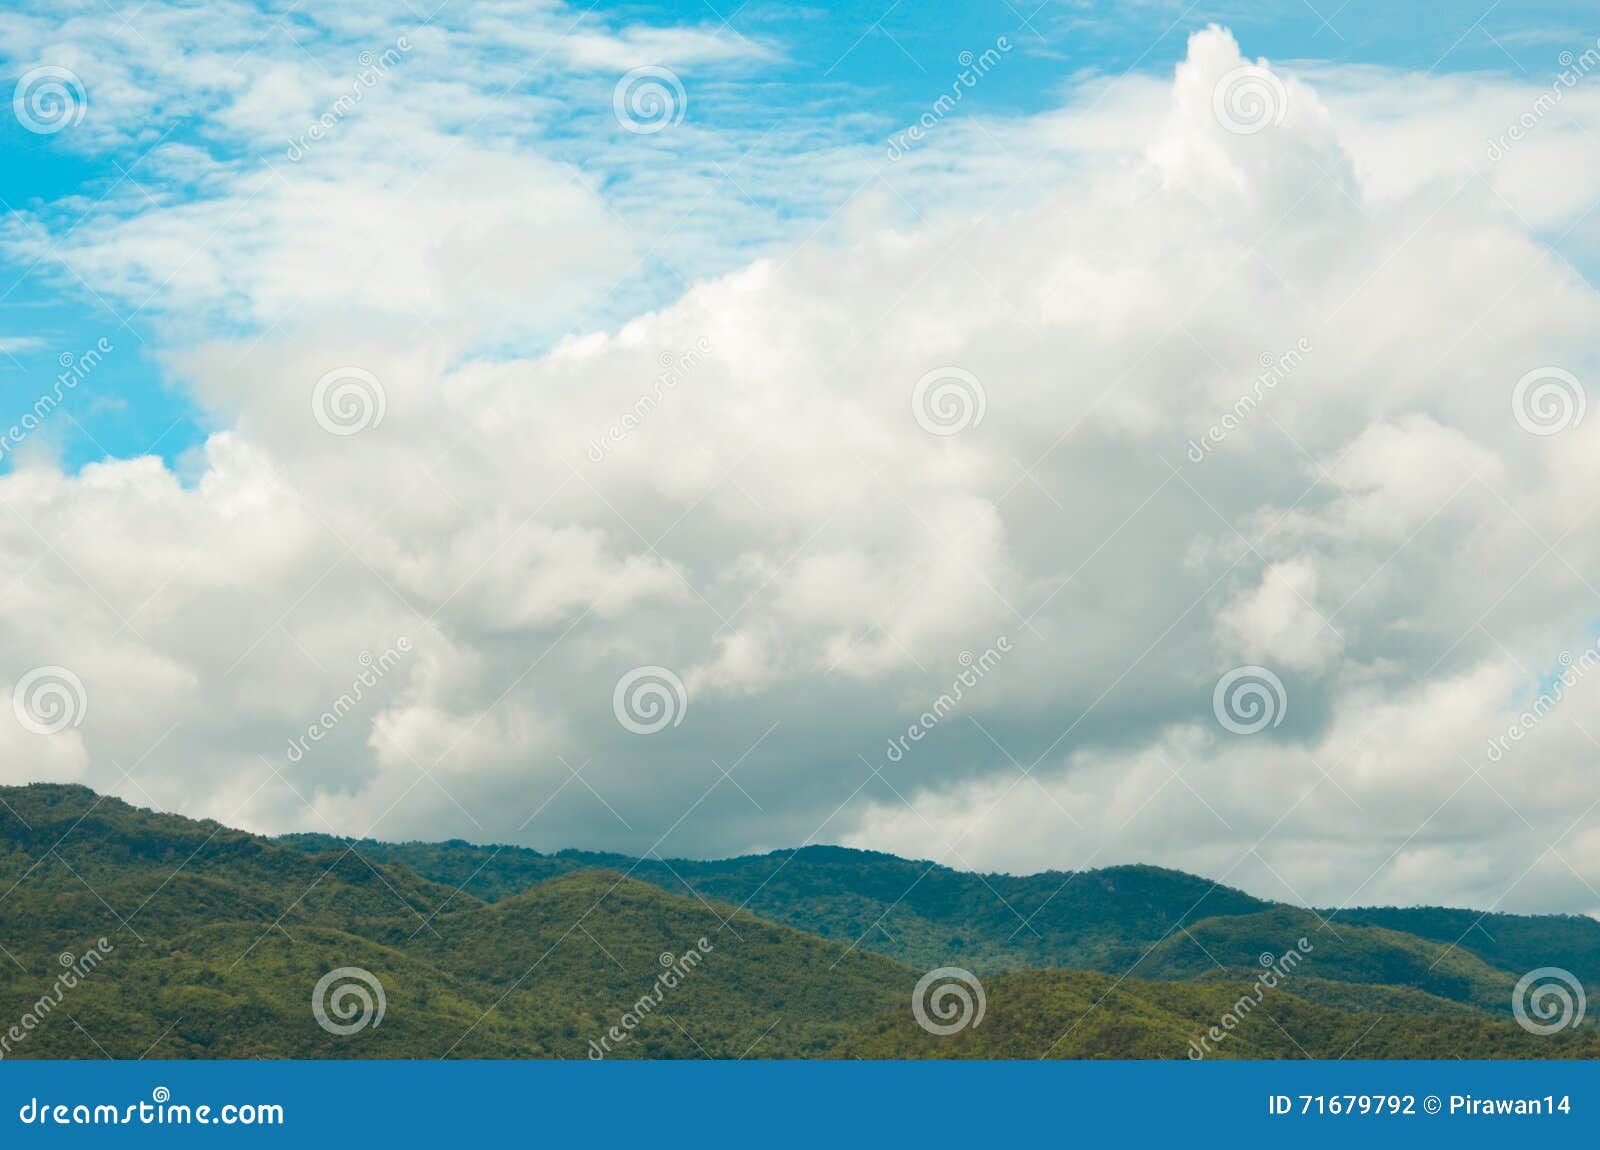 Clearly and hazy sky with white and gray clouds over mountains